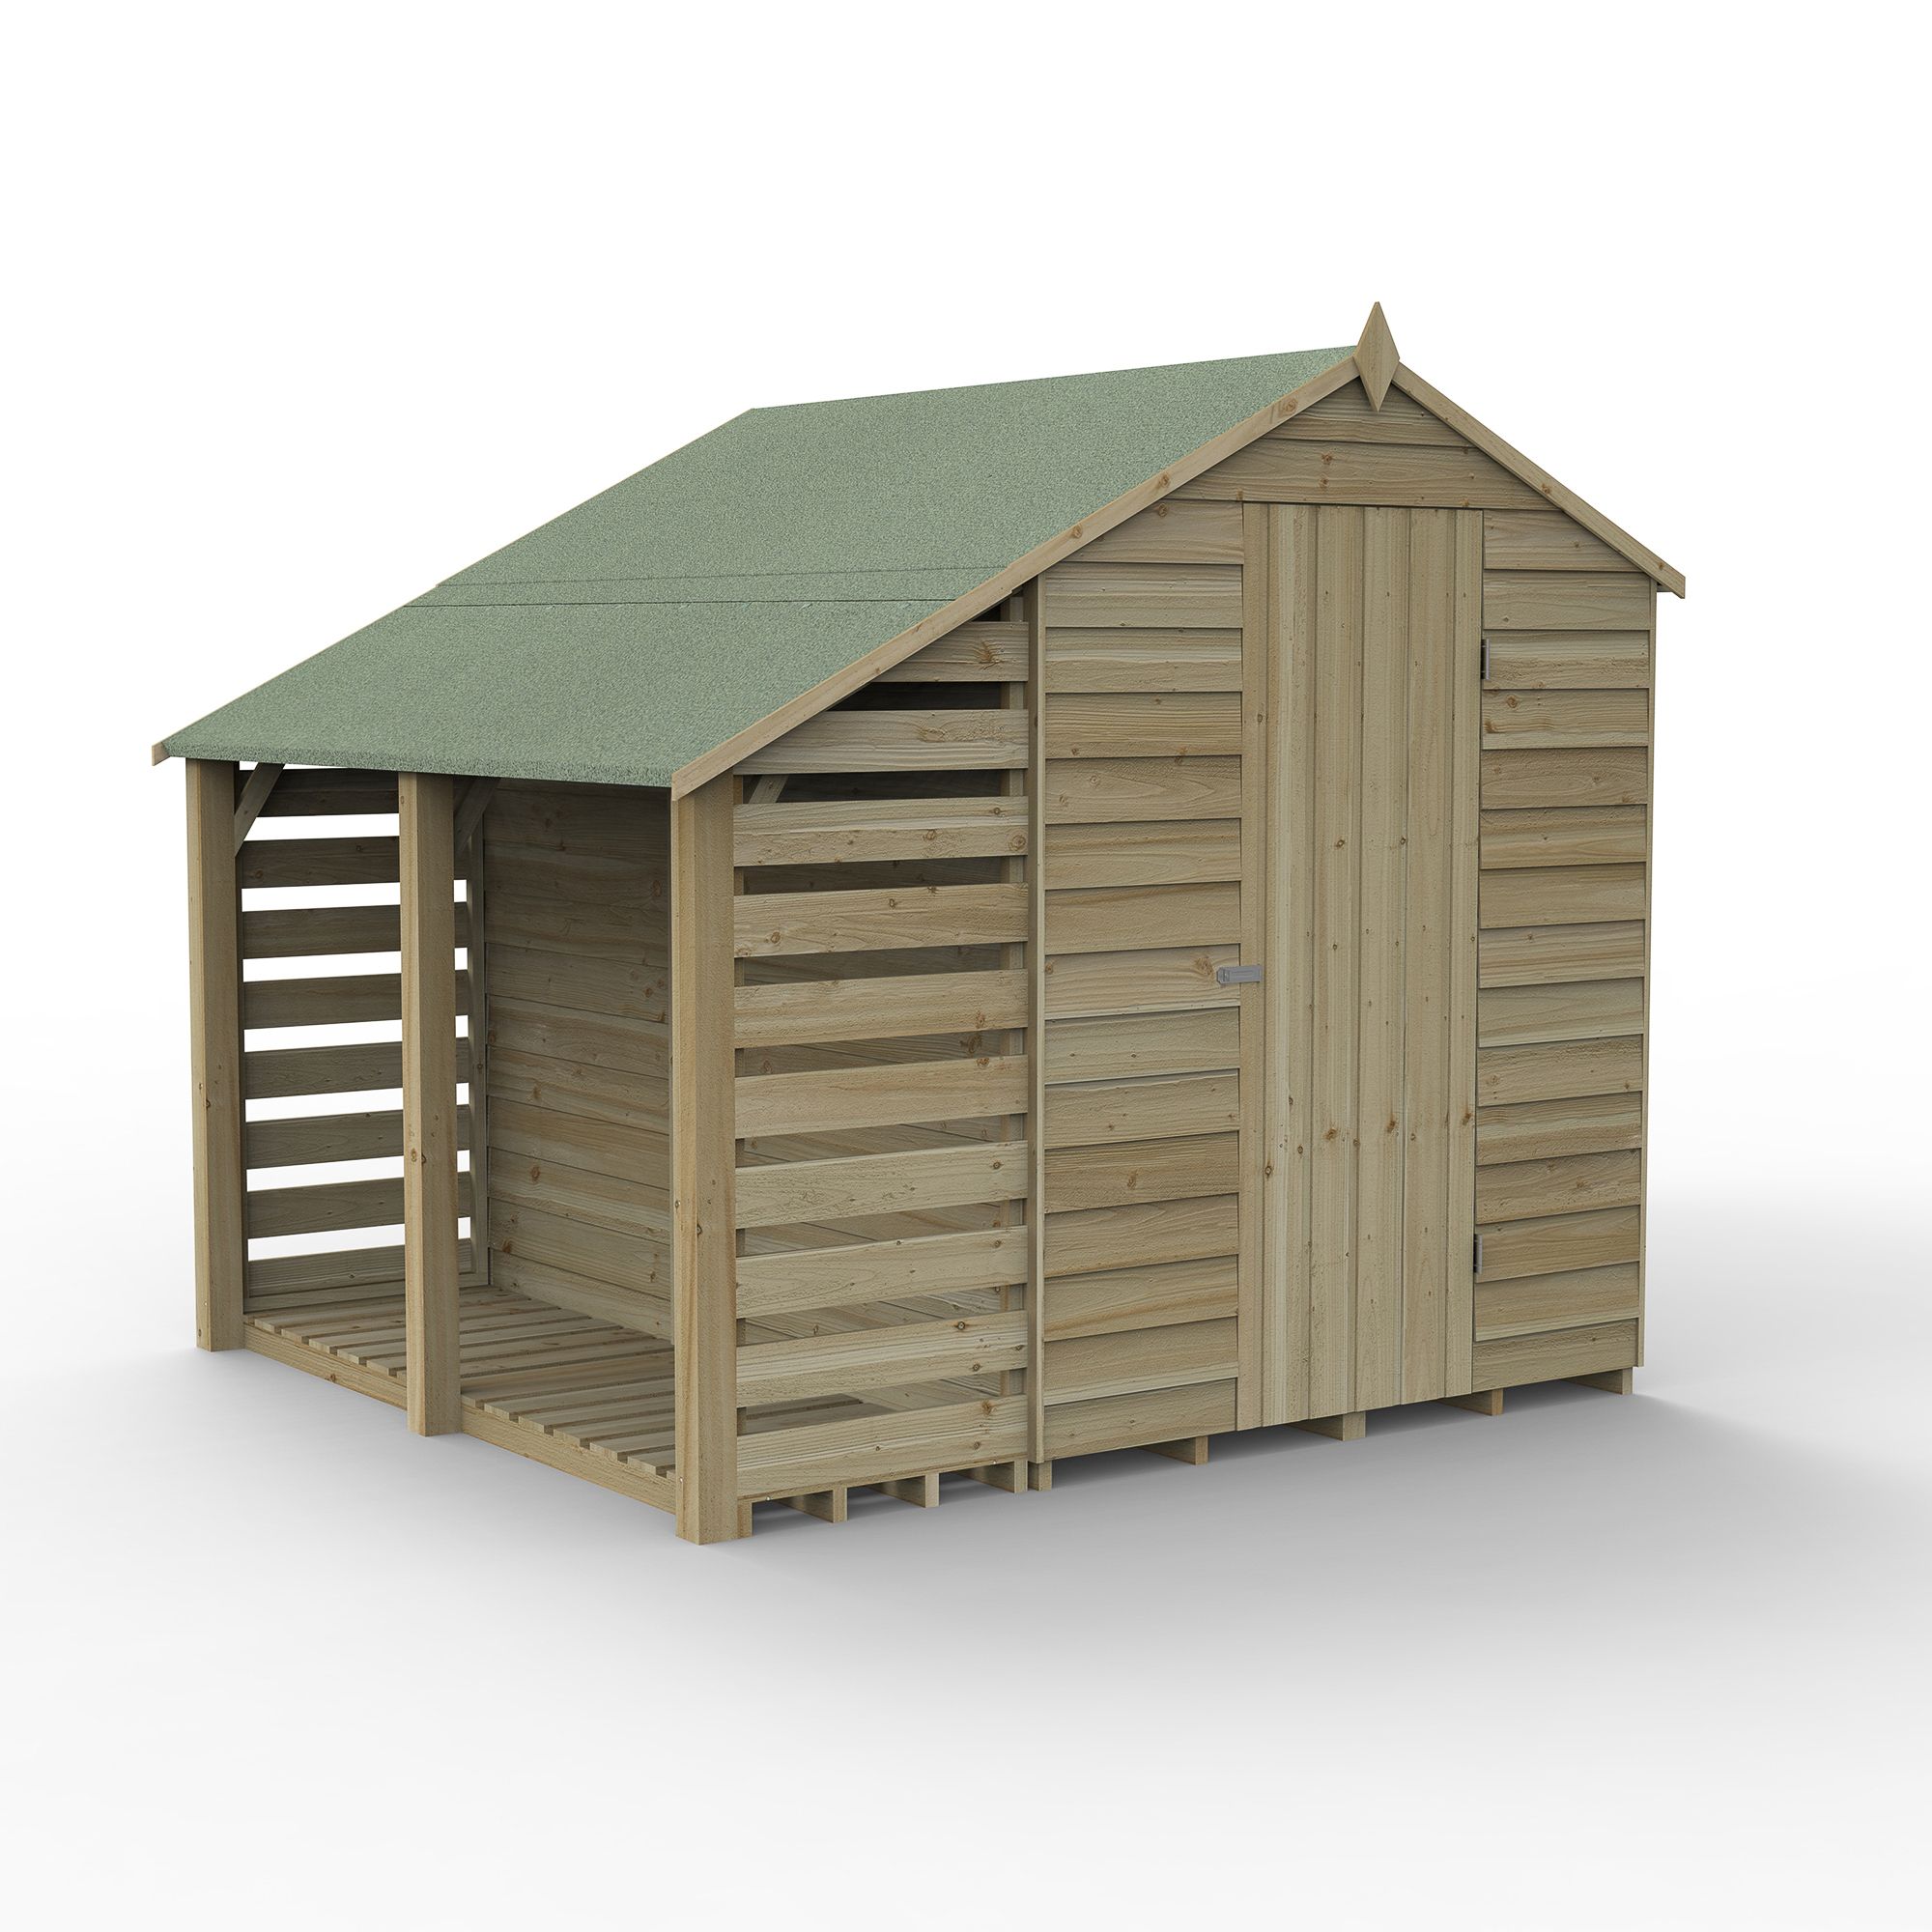 Forest Garden Shed 6x4 ft Apex Wooden Shed with floor & 2 windows - Assembly service included